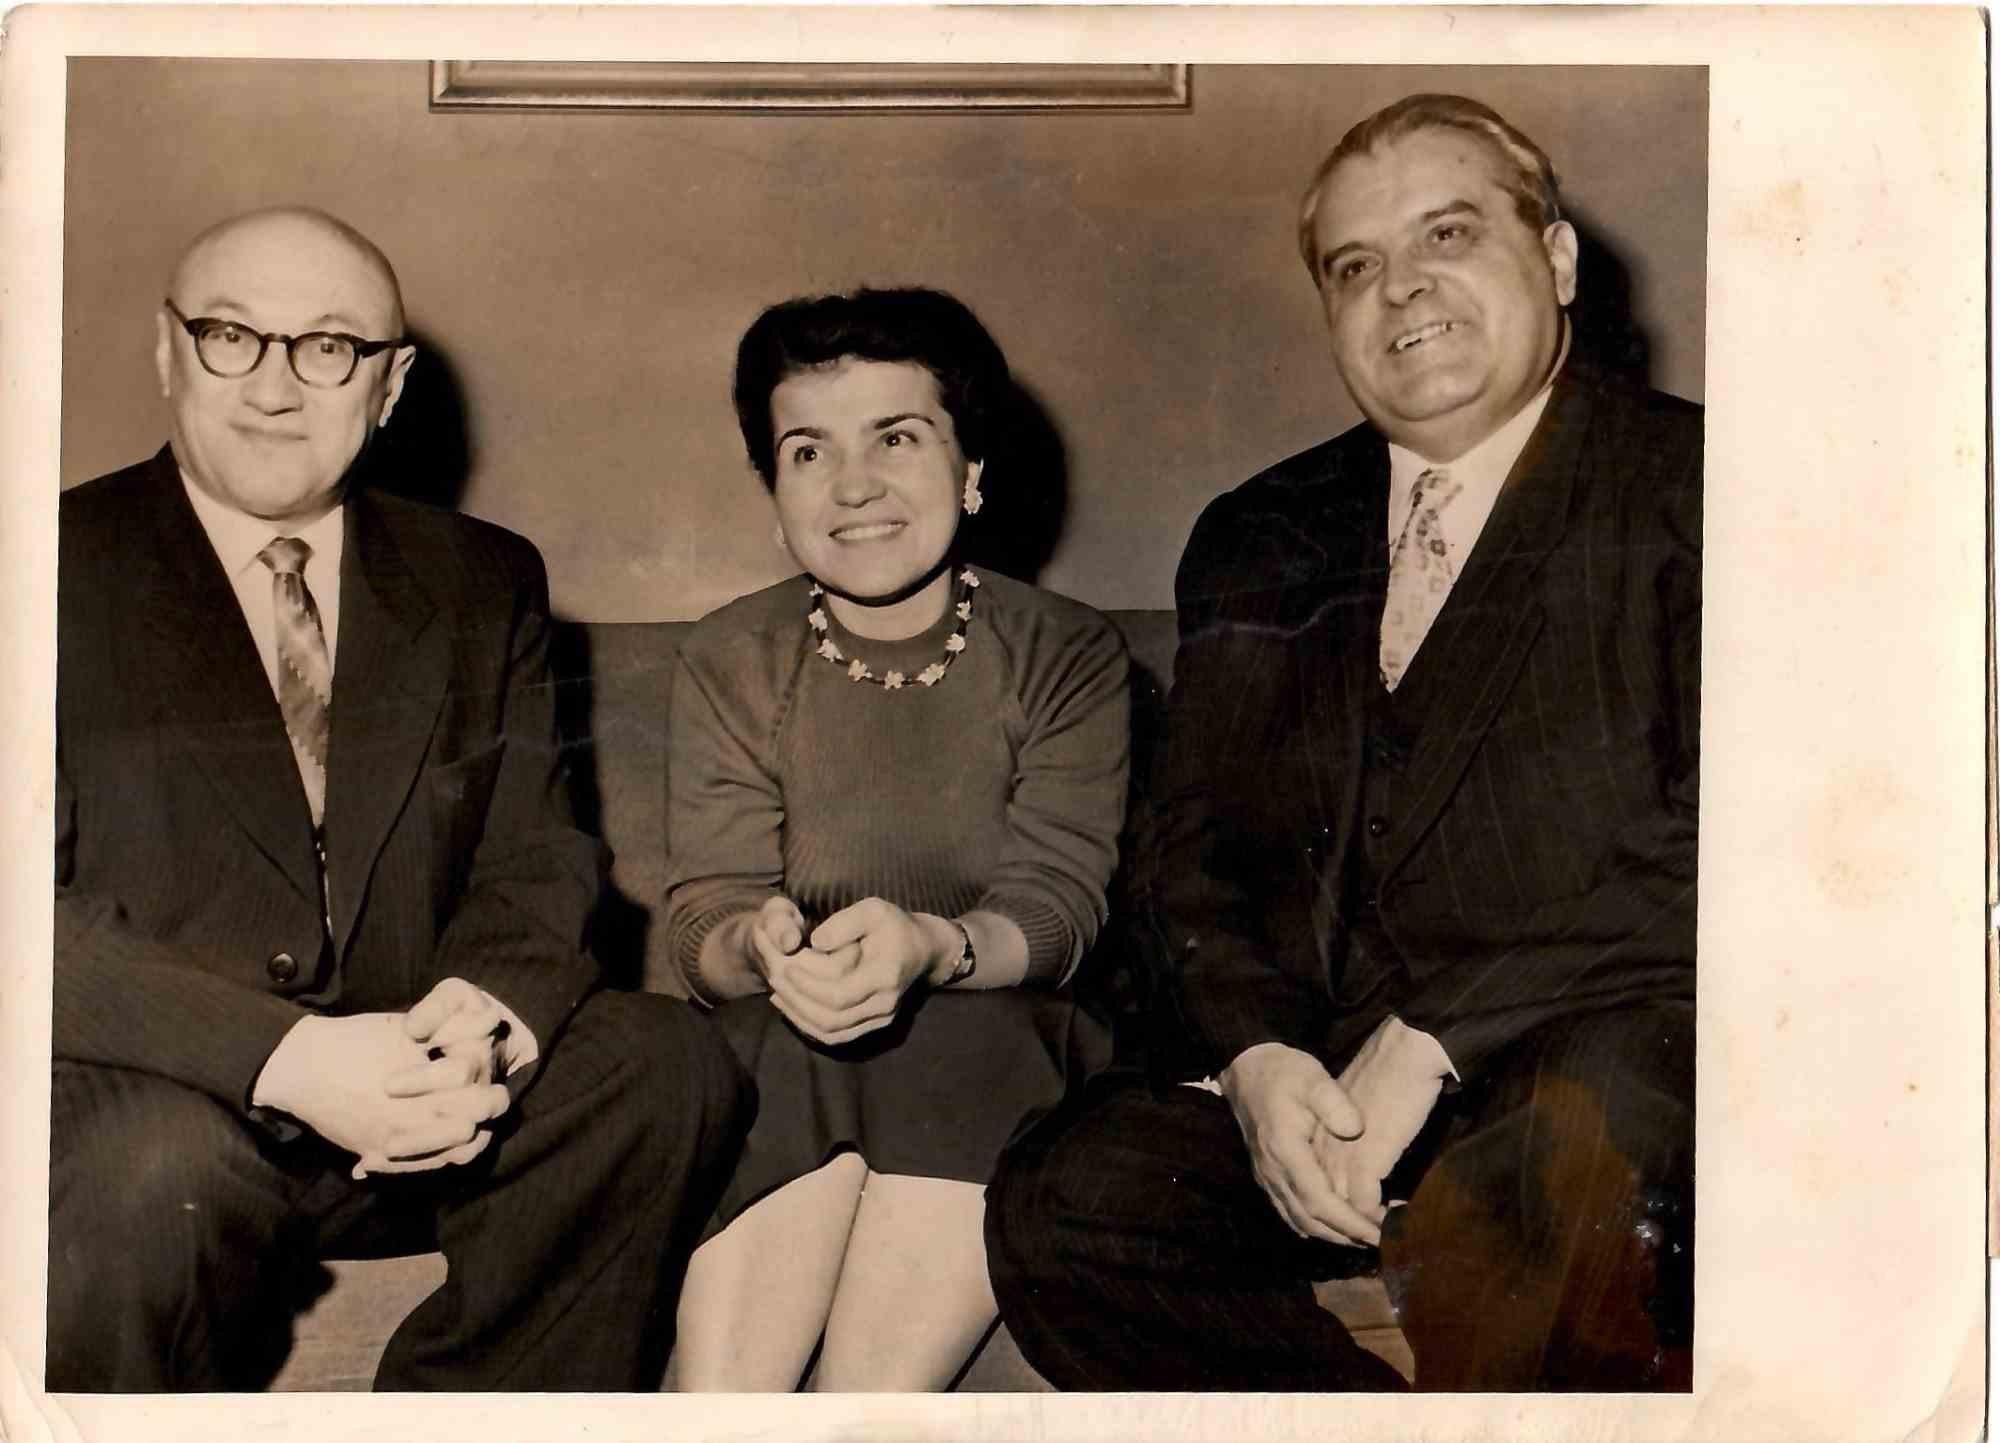 Unknown Black and White Photograph - Three Russian Scientists in New York - Original Photograph - 1960s